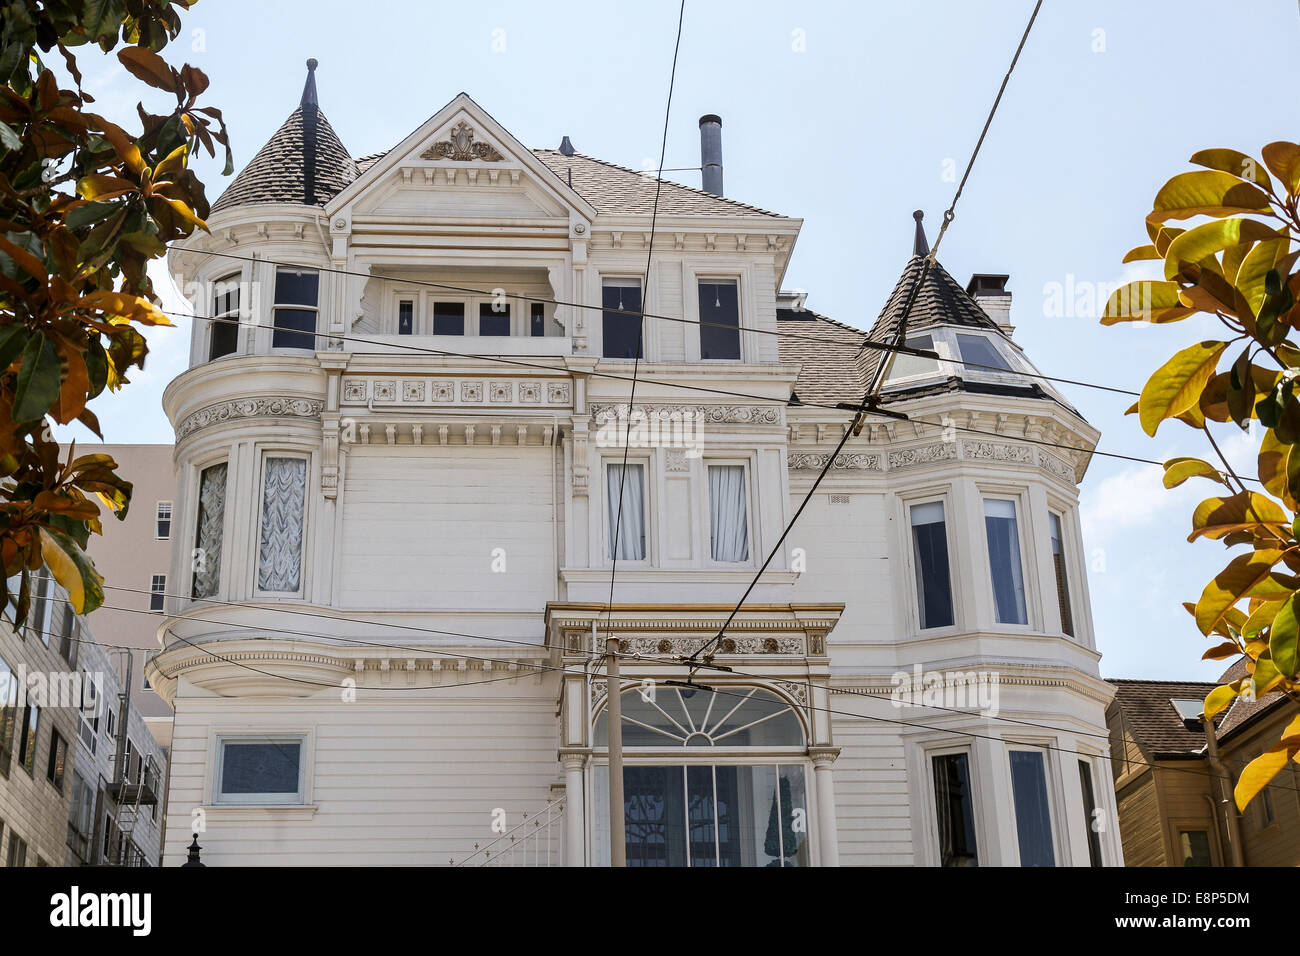 A Victorian home owned by director Francis Ford Coppola in the 1980s, now owned by the designer Jessica McClintock. Stock Photo